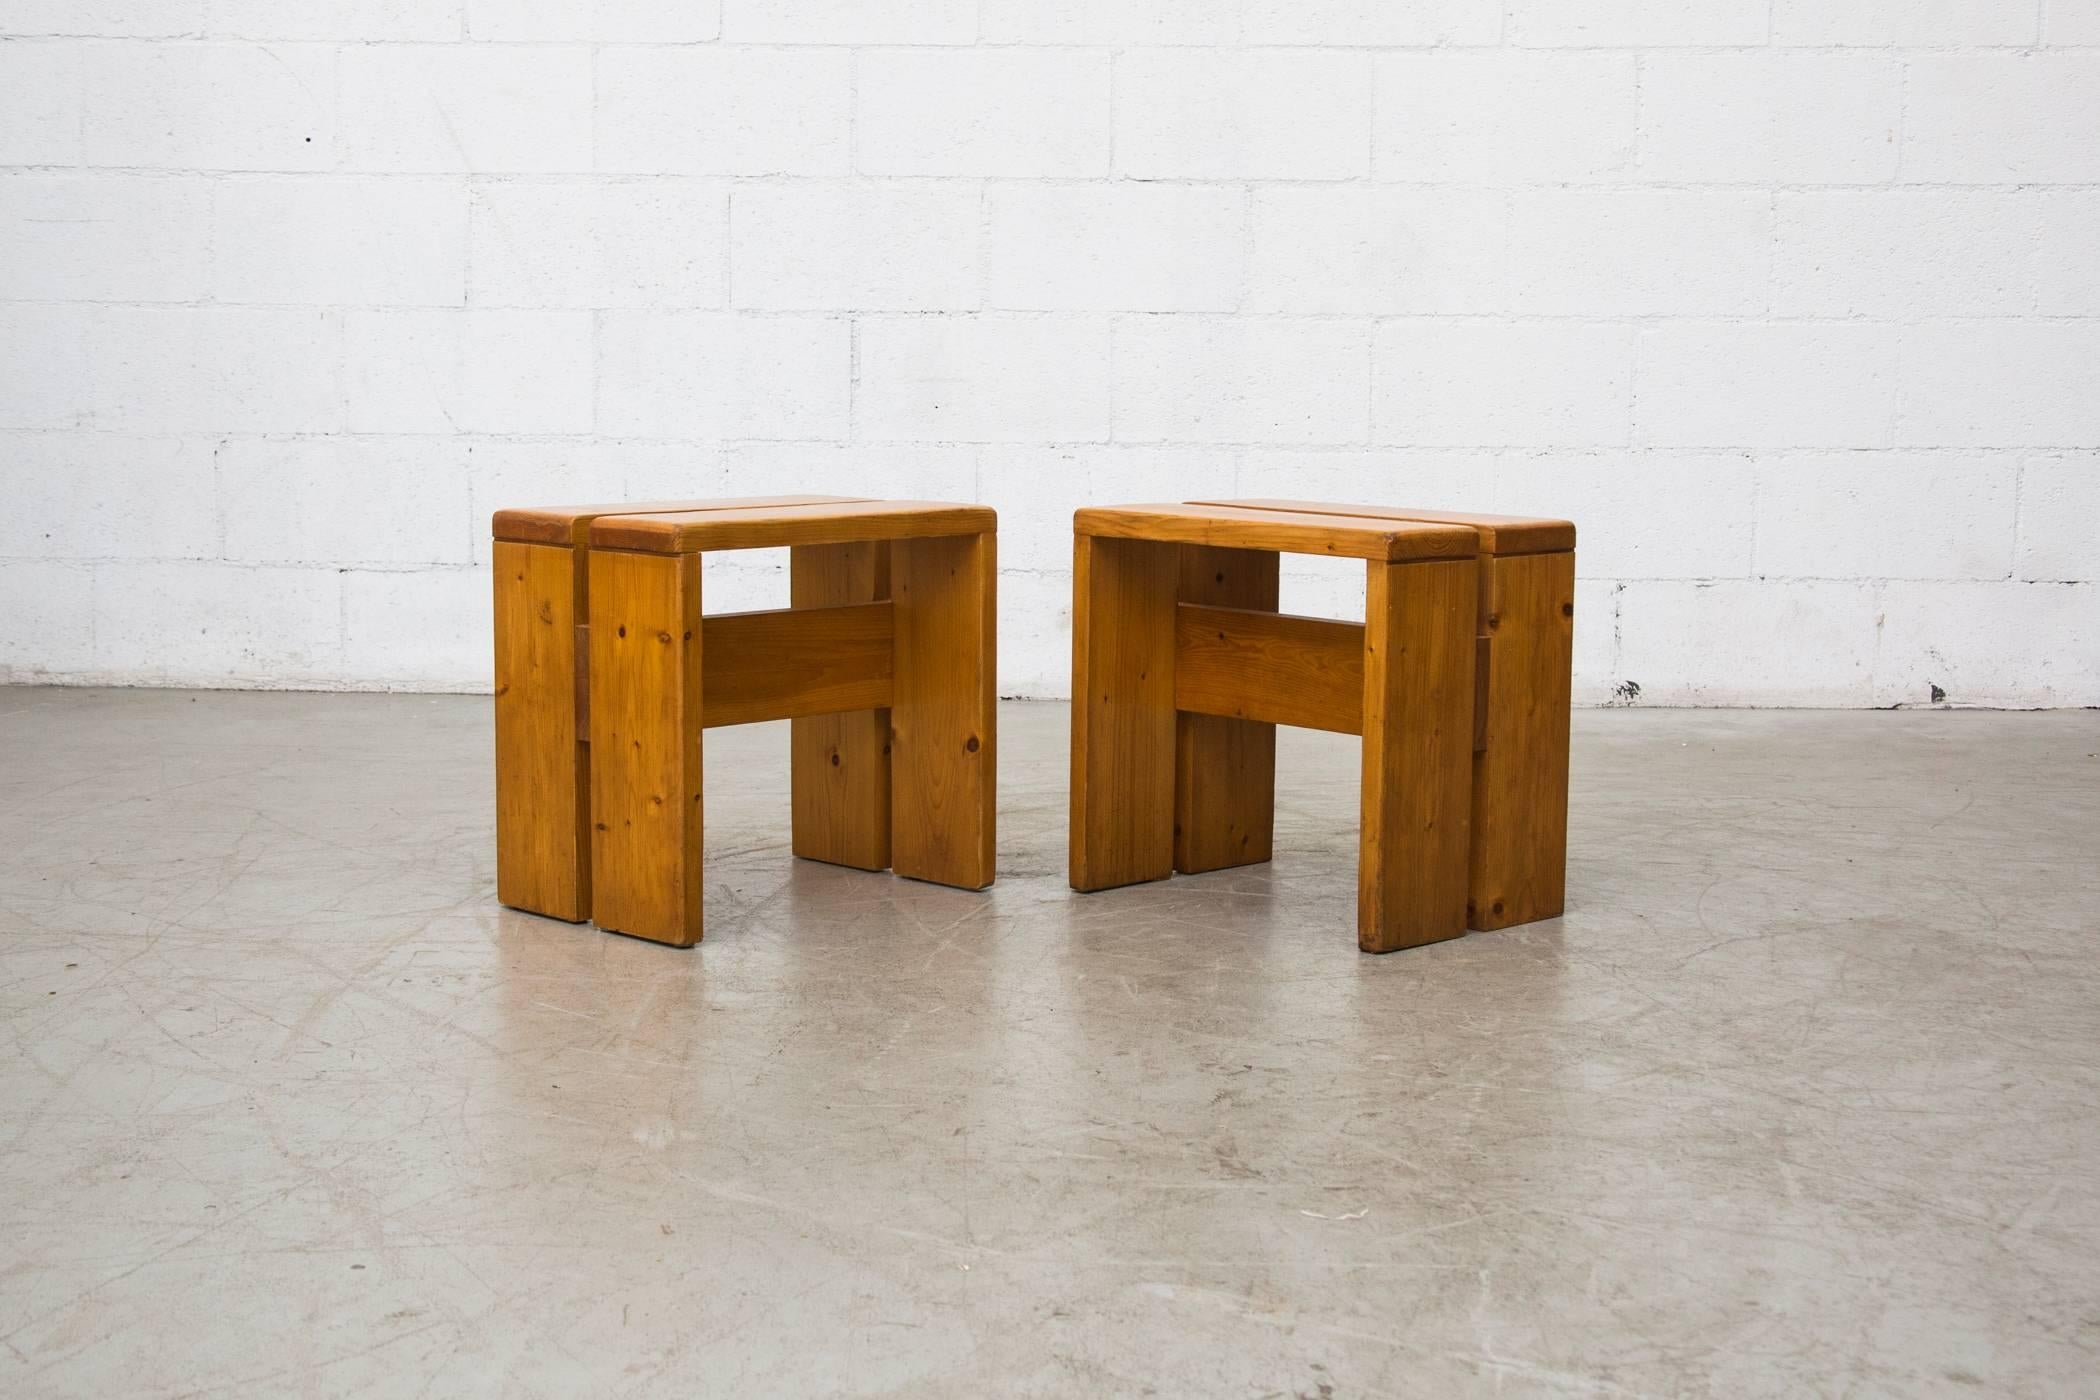 Charlotte Perriand solid pine stools from Les Arcs, France, circa 1968. In good original condition with some wear to surface consistent with age and use. Set price.